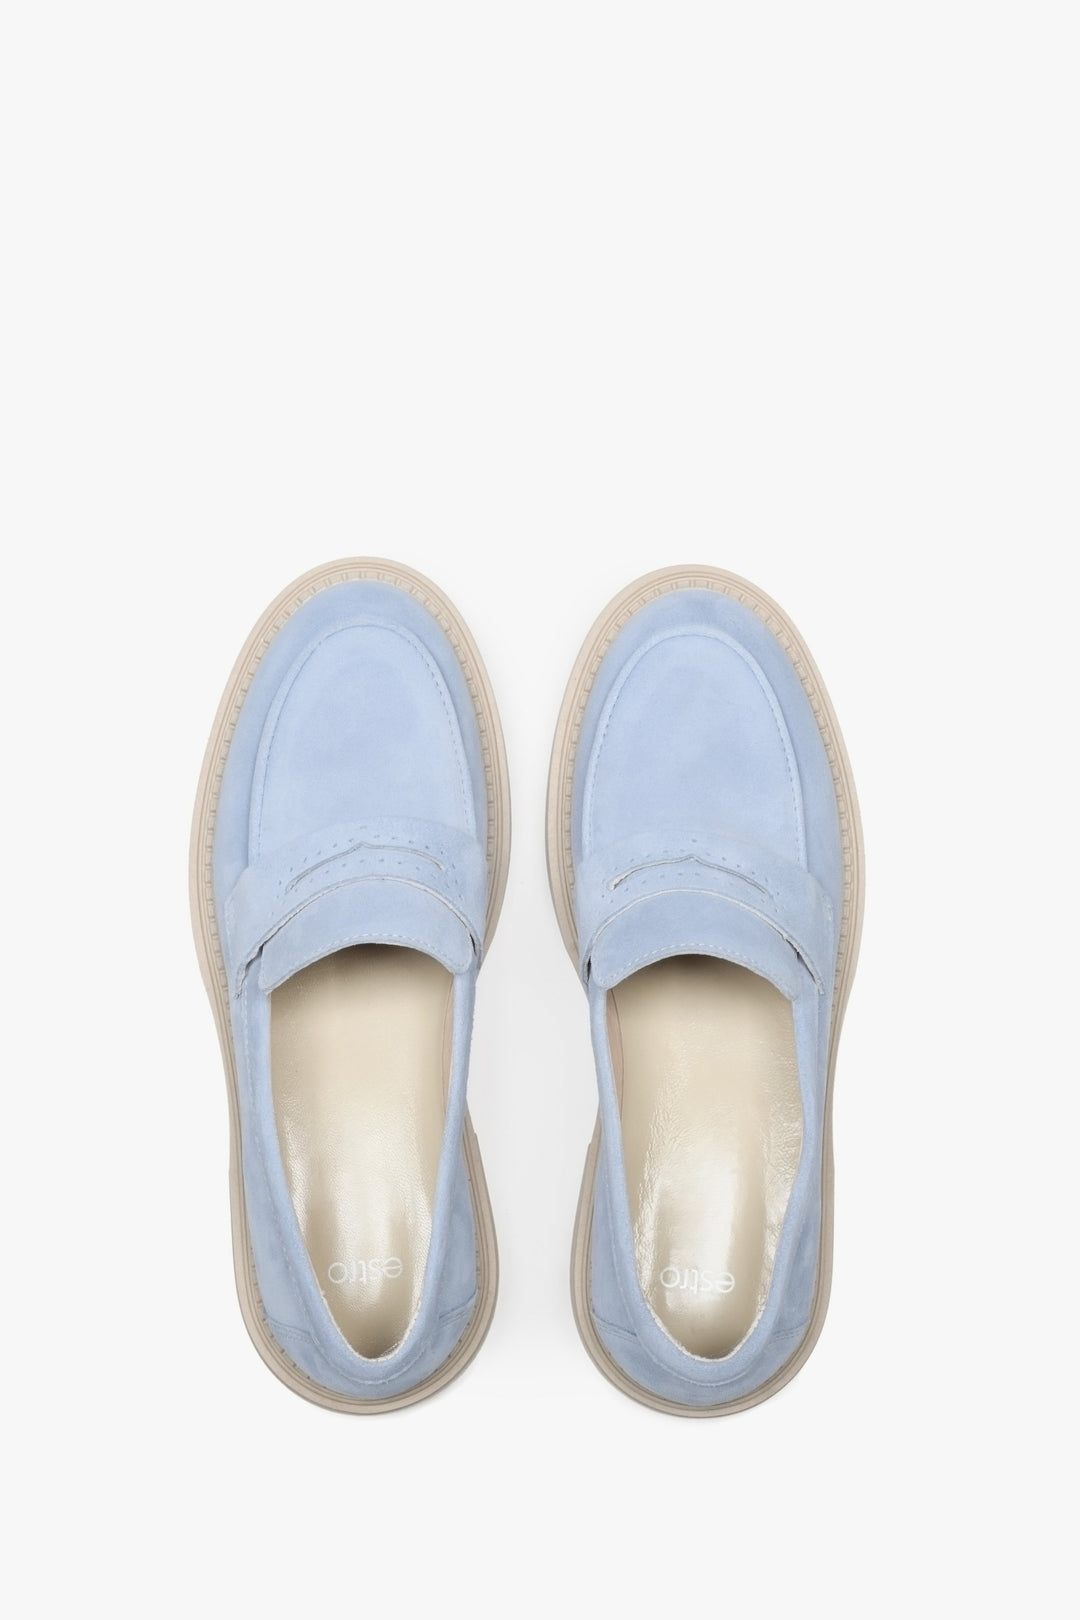 Light blue suede loafers for women Estro - presentation of the model from above.